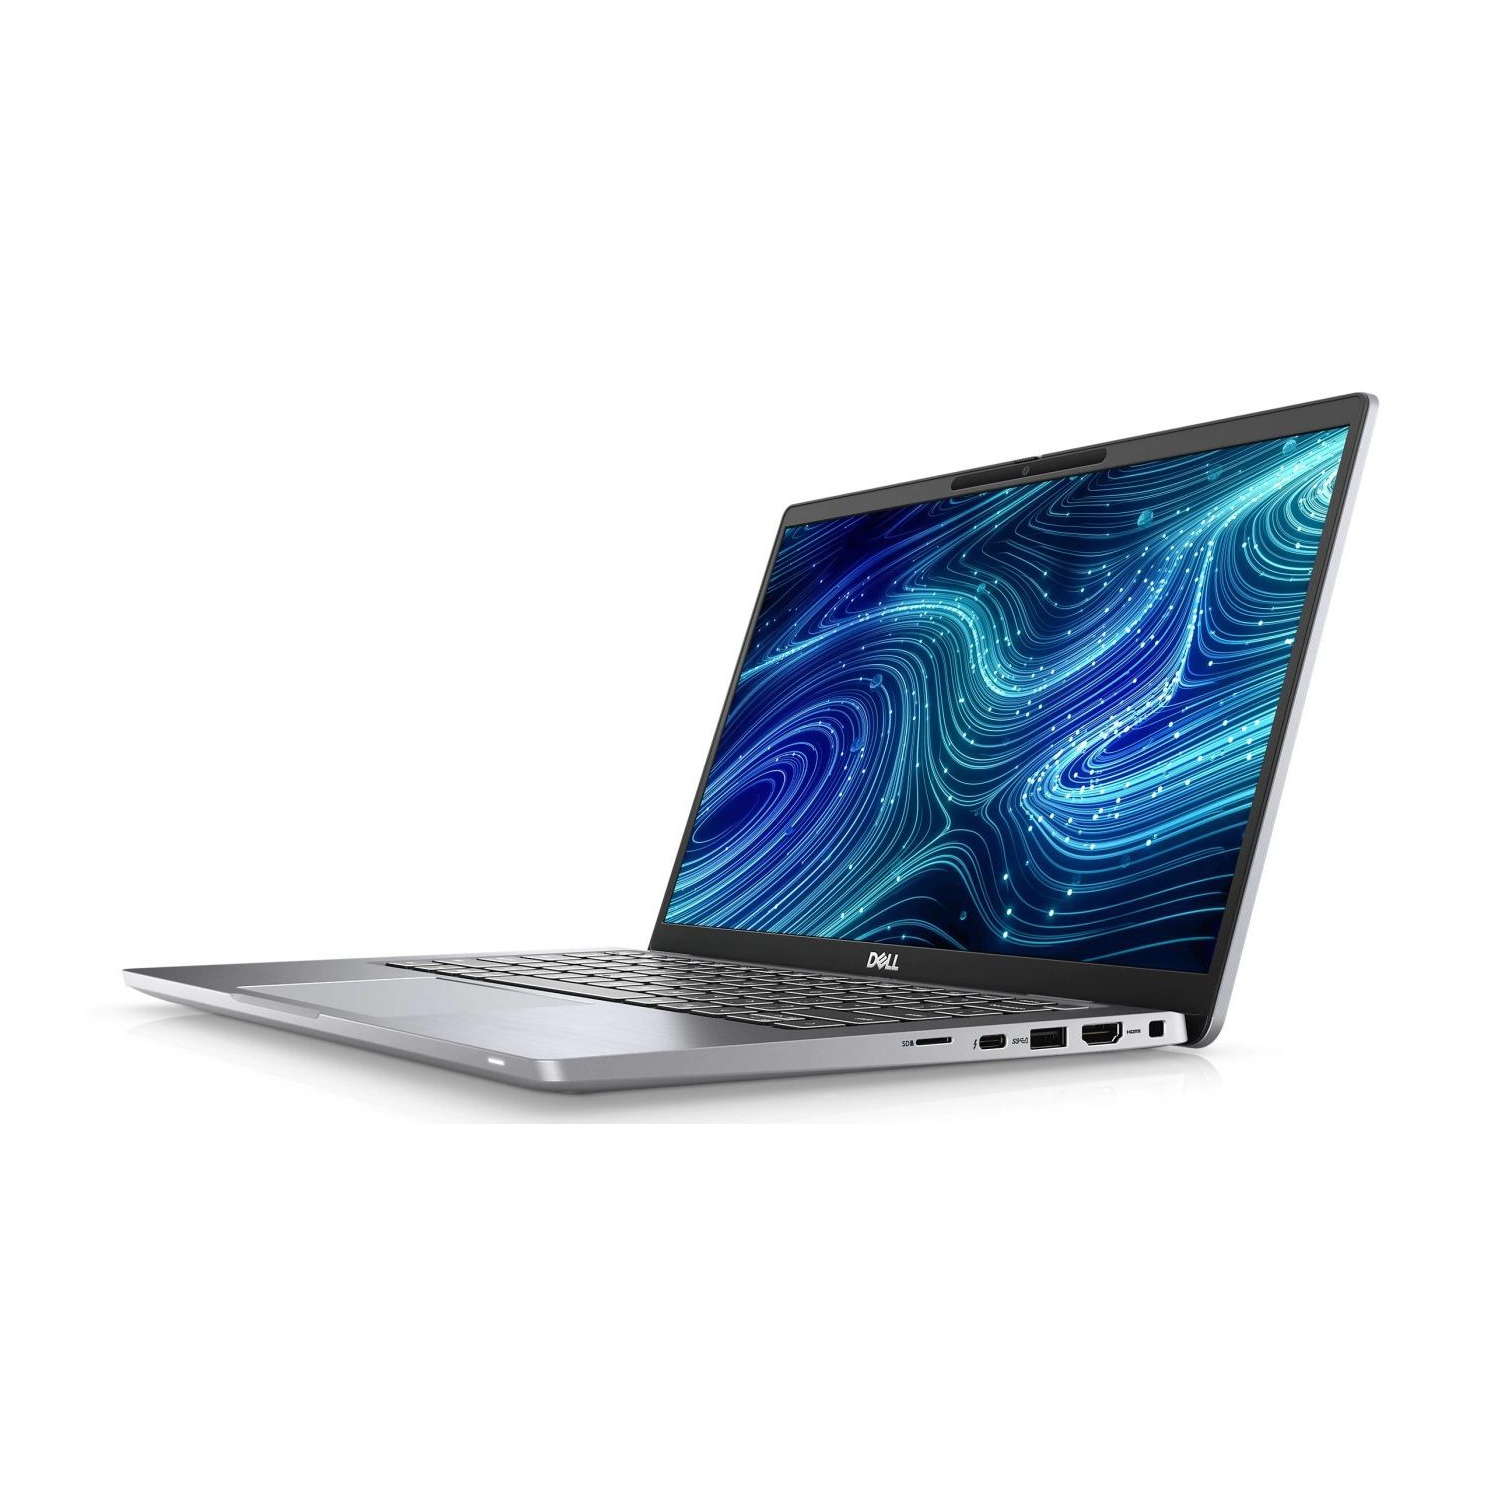 Refurbished (Excellent) – Dell Latitude 7000 7420 Laptop (2021) | 14" FHD Touch | Core i7 - 1TB SSD - 16GB RAM | 4 Cores @ 4.4 GHz - 11th Gen CPU